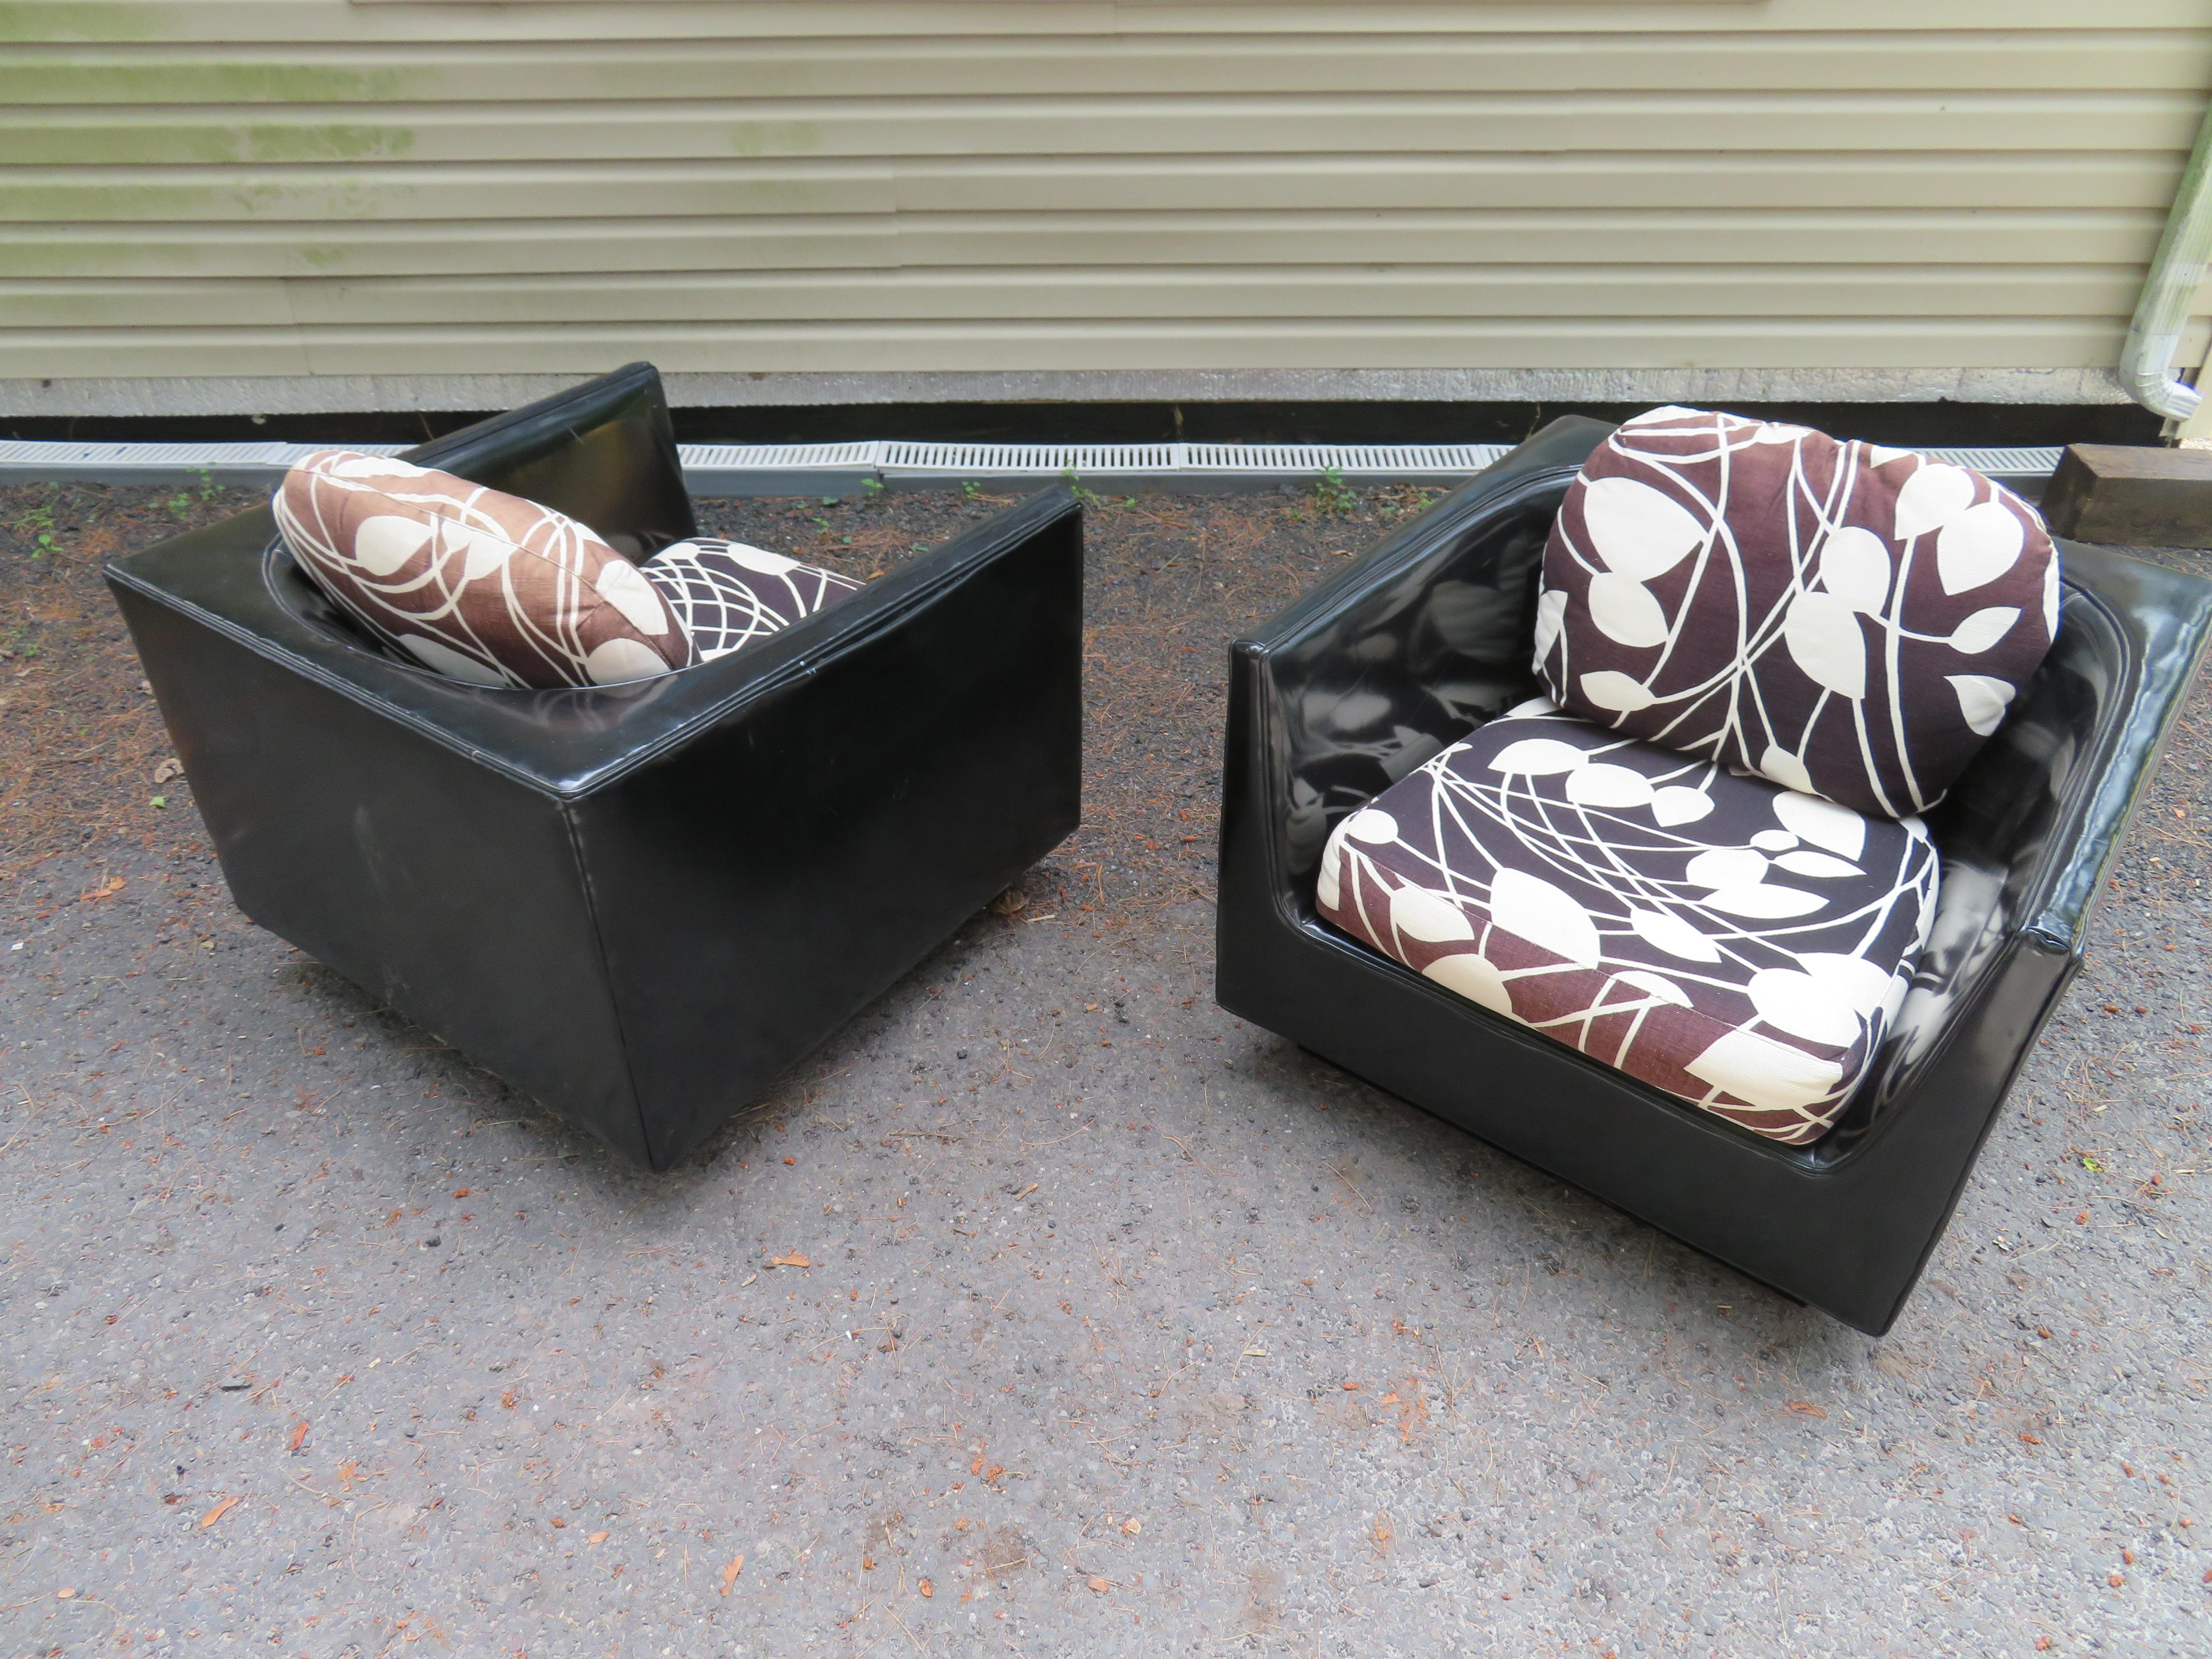 Handsome pair of signed Selig cube lounge chairs in they style of John Van Koert. We love the unique curved u-shaped backs along with the original black and white linen seat cushions. The original upholstery does show wear with some fading to the